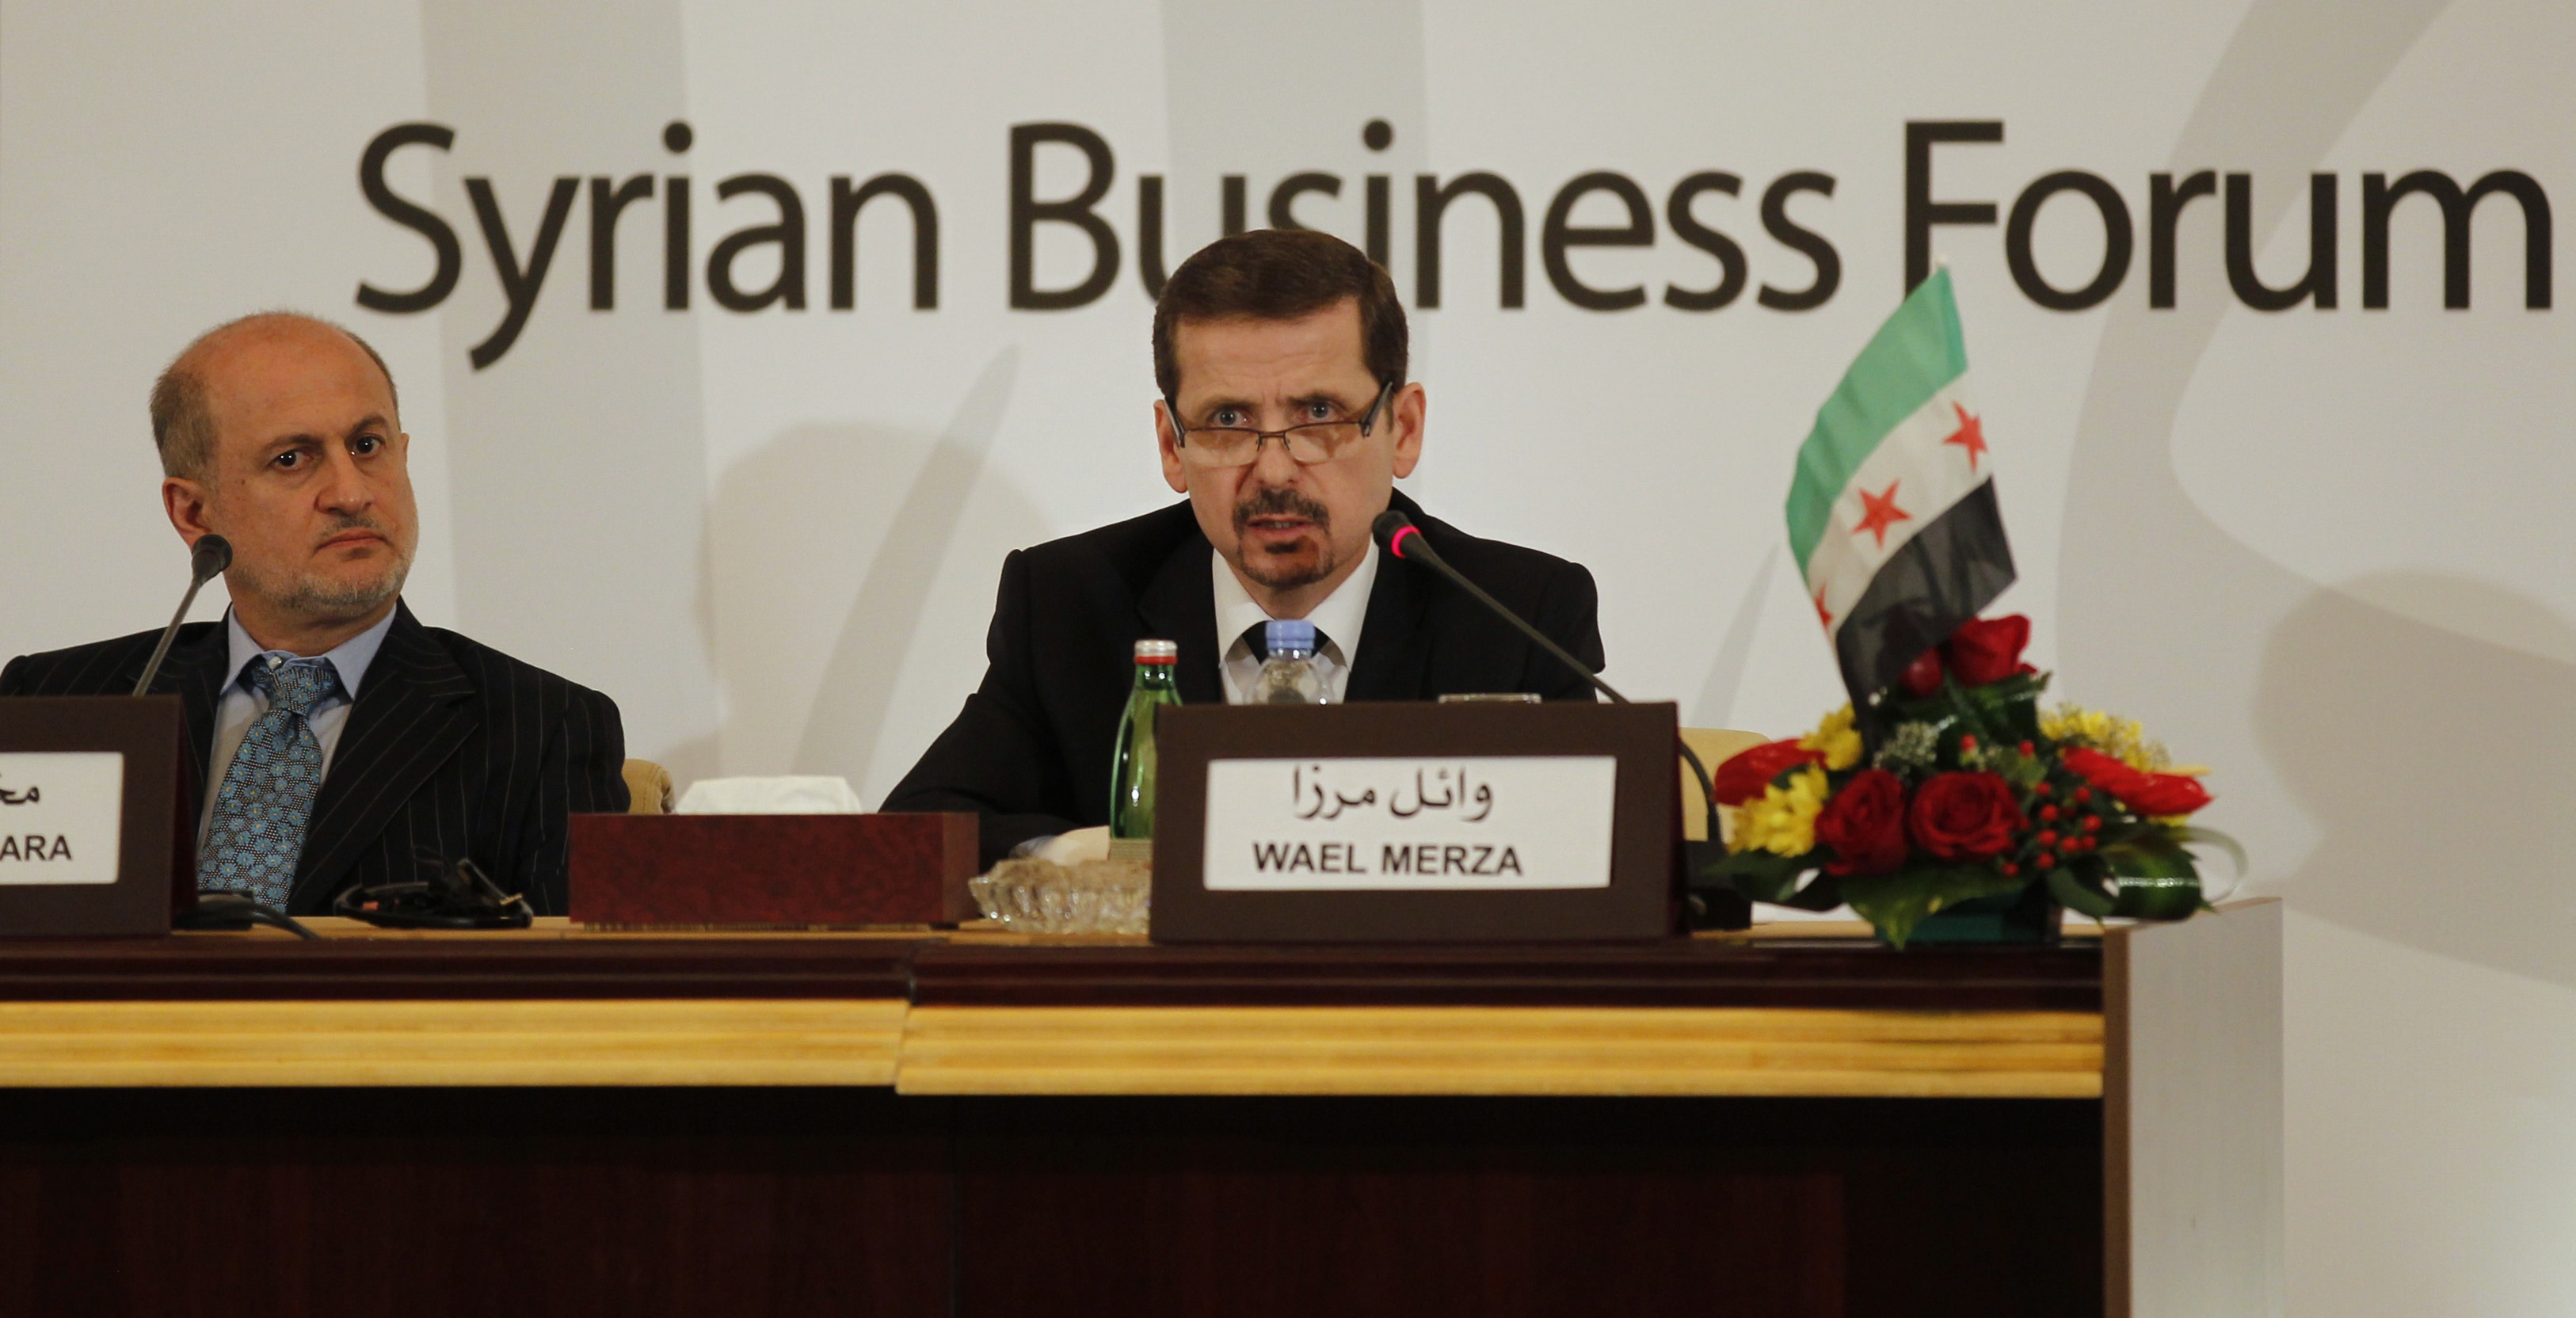 Dr. Wael Mirza, a Syrian dissident working independently with the Syrian opposition abroad, speaks during the Syrian Business Forum in Doha